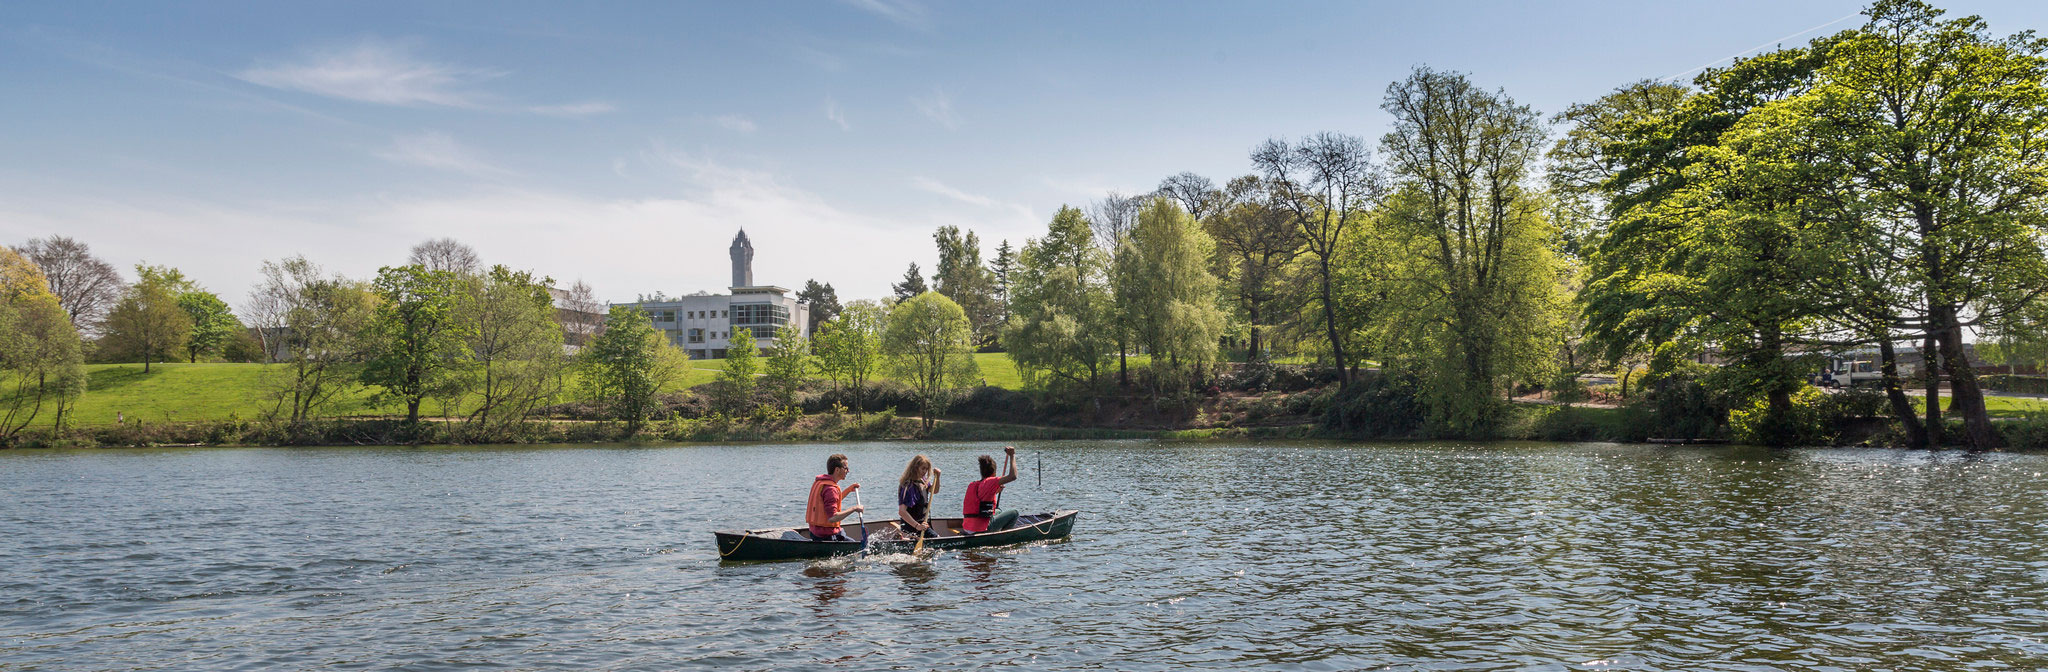 Canoers on campus loch